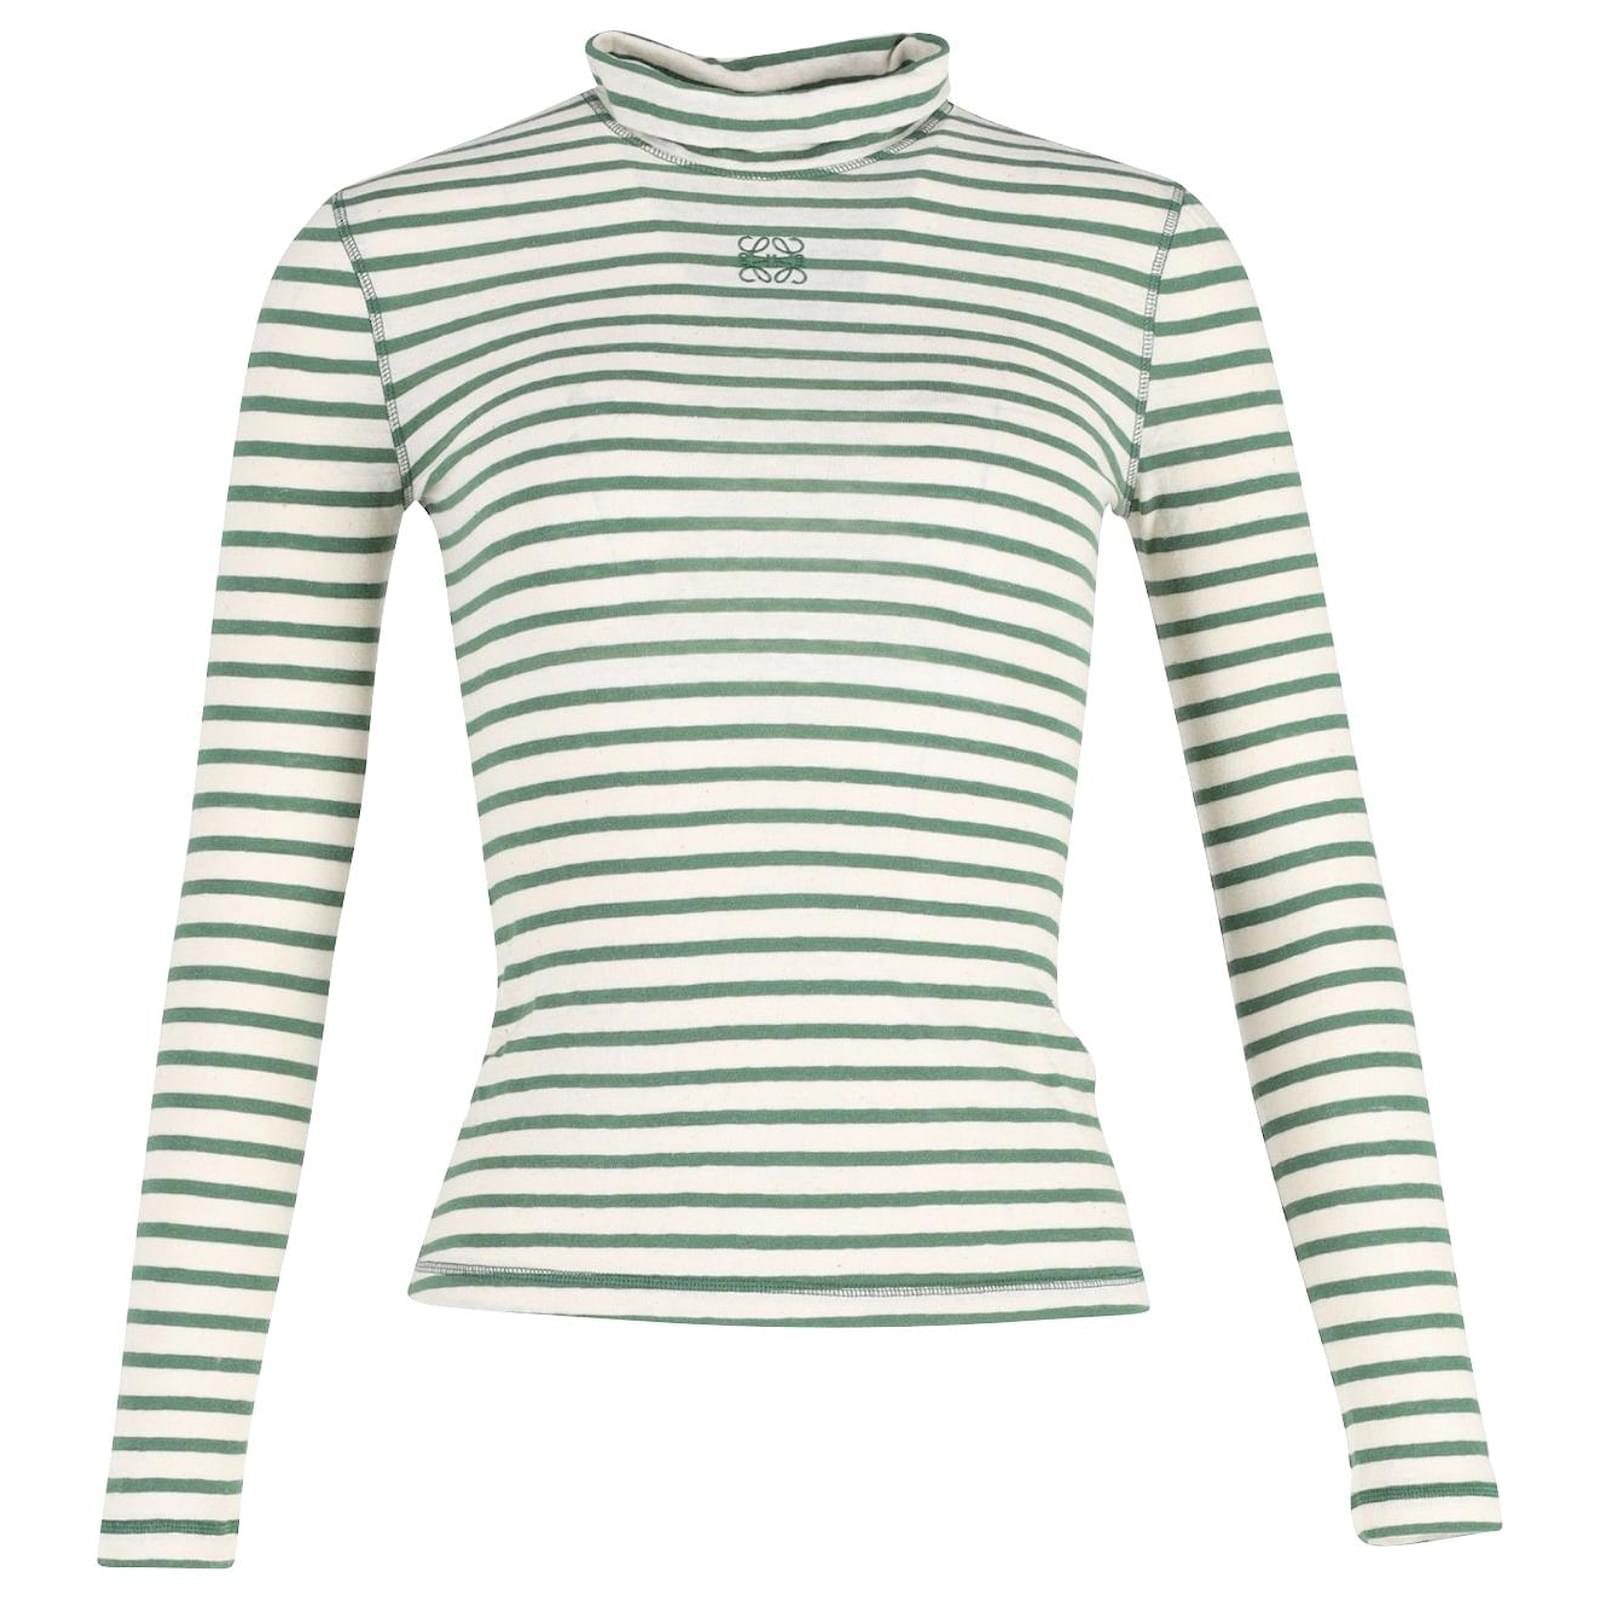 Loewe Striped High-Neck Jersey Top in Green Cotton ref